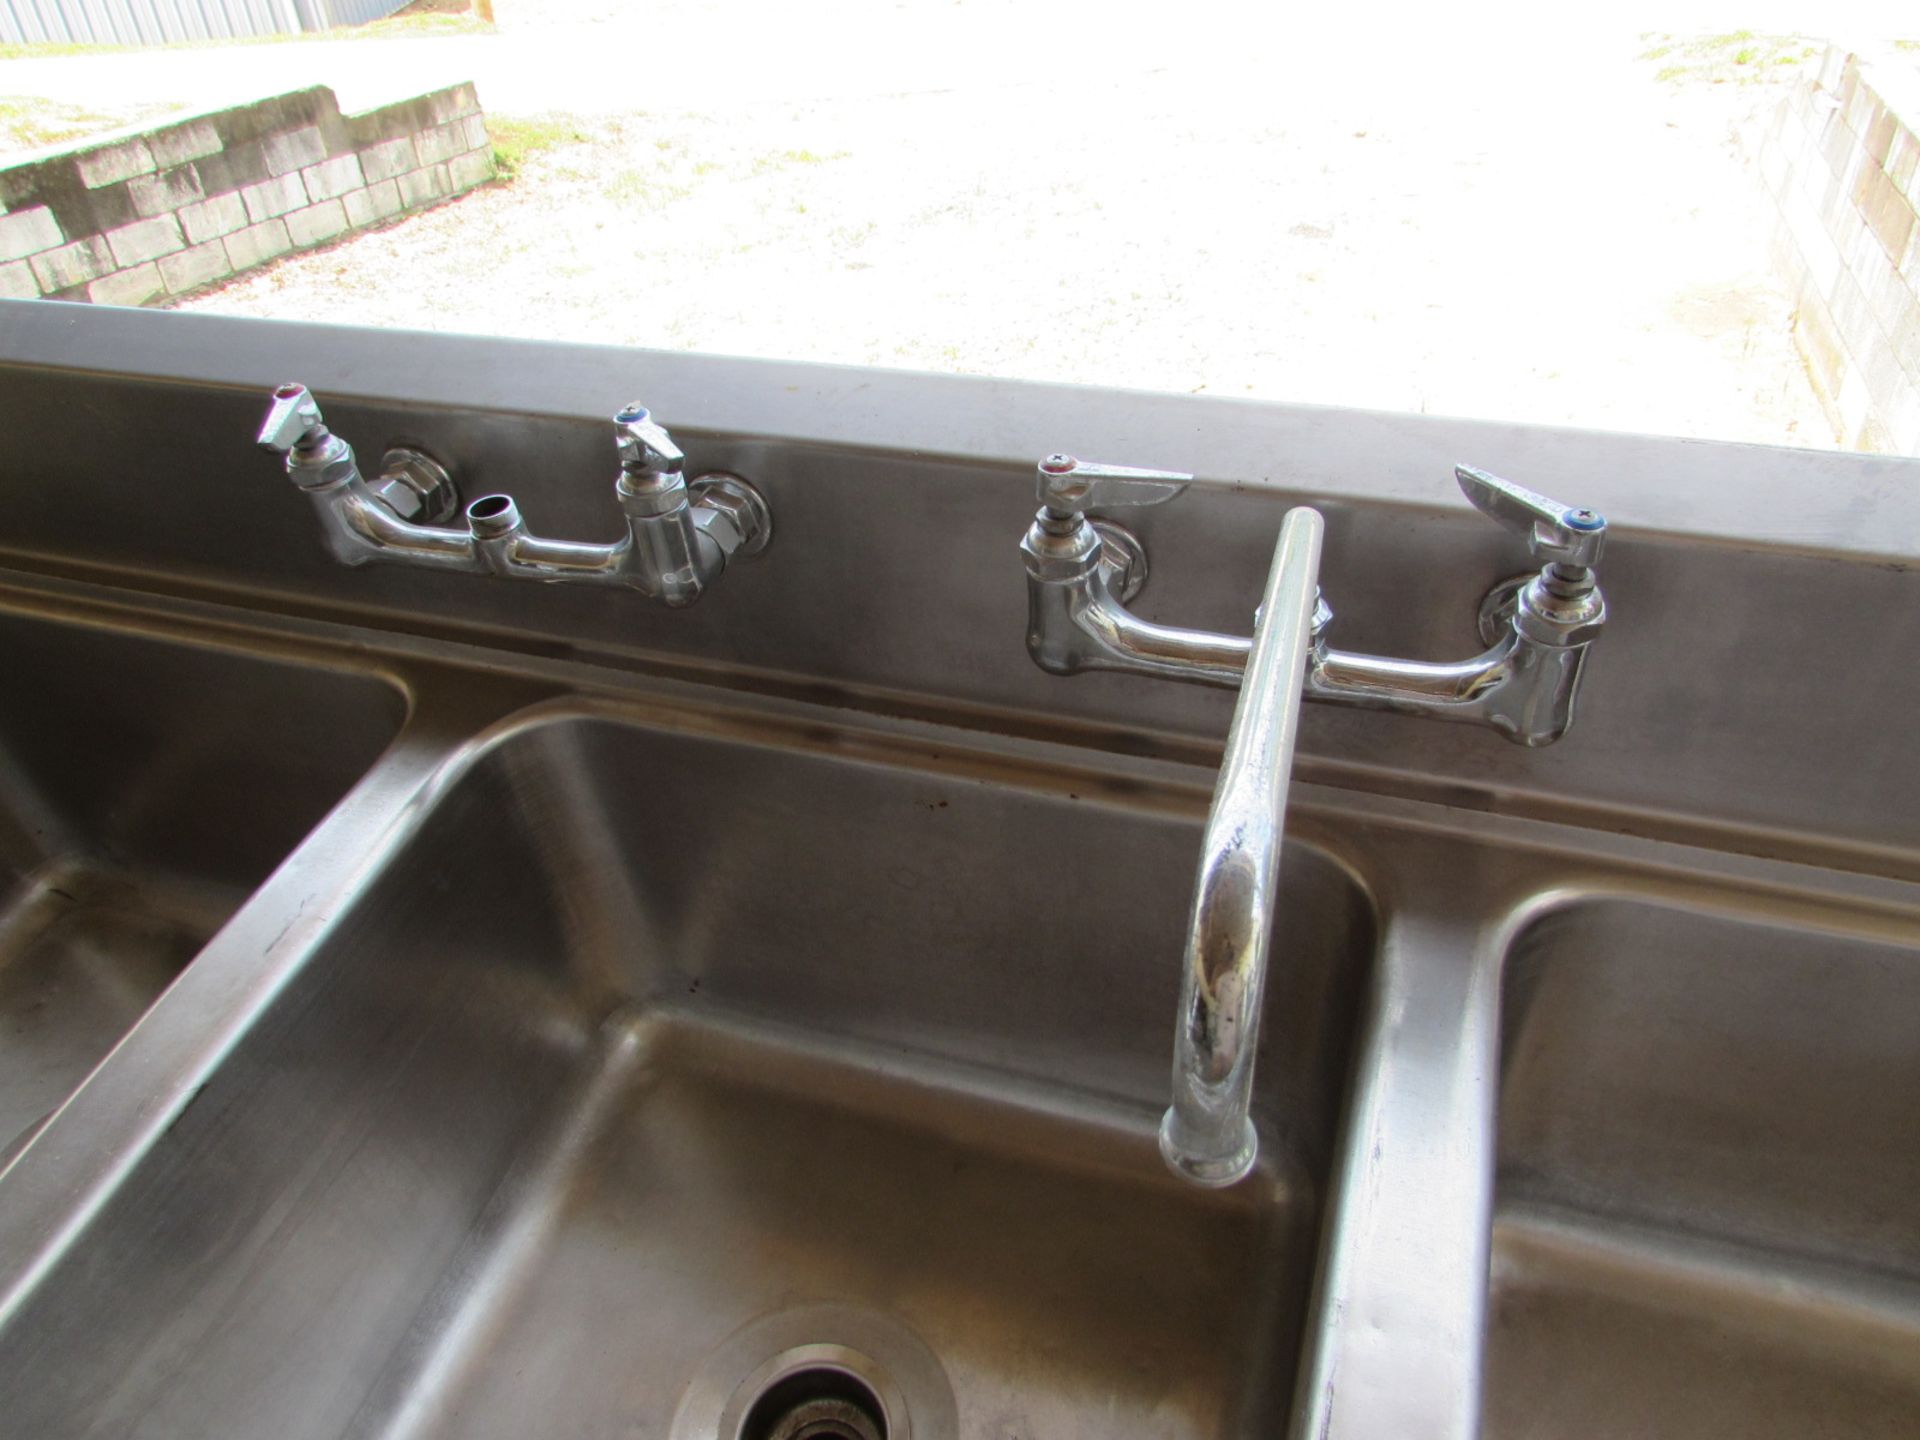 Stainless Steel Sink 3 Compartment with 2 Drainboards and Legs - Image 5 of 7